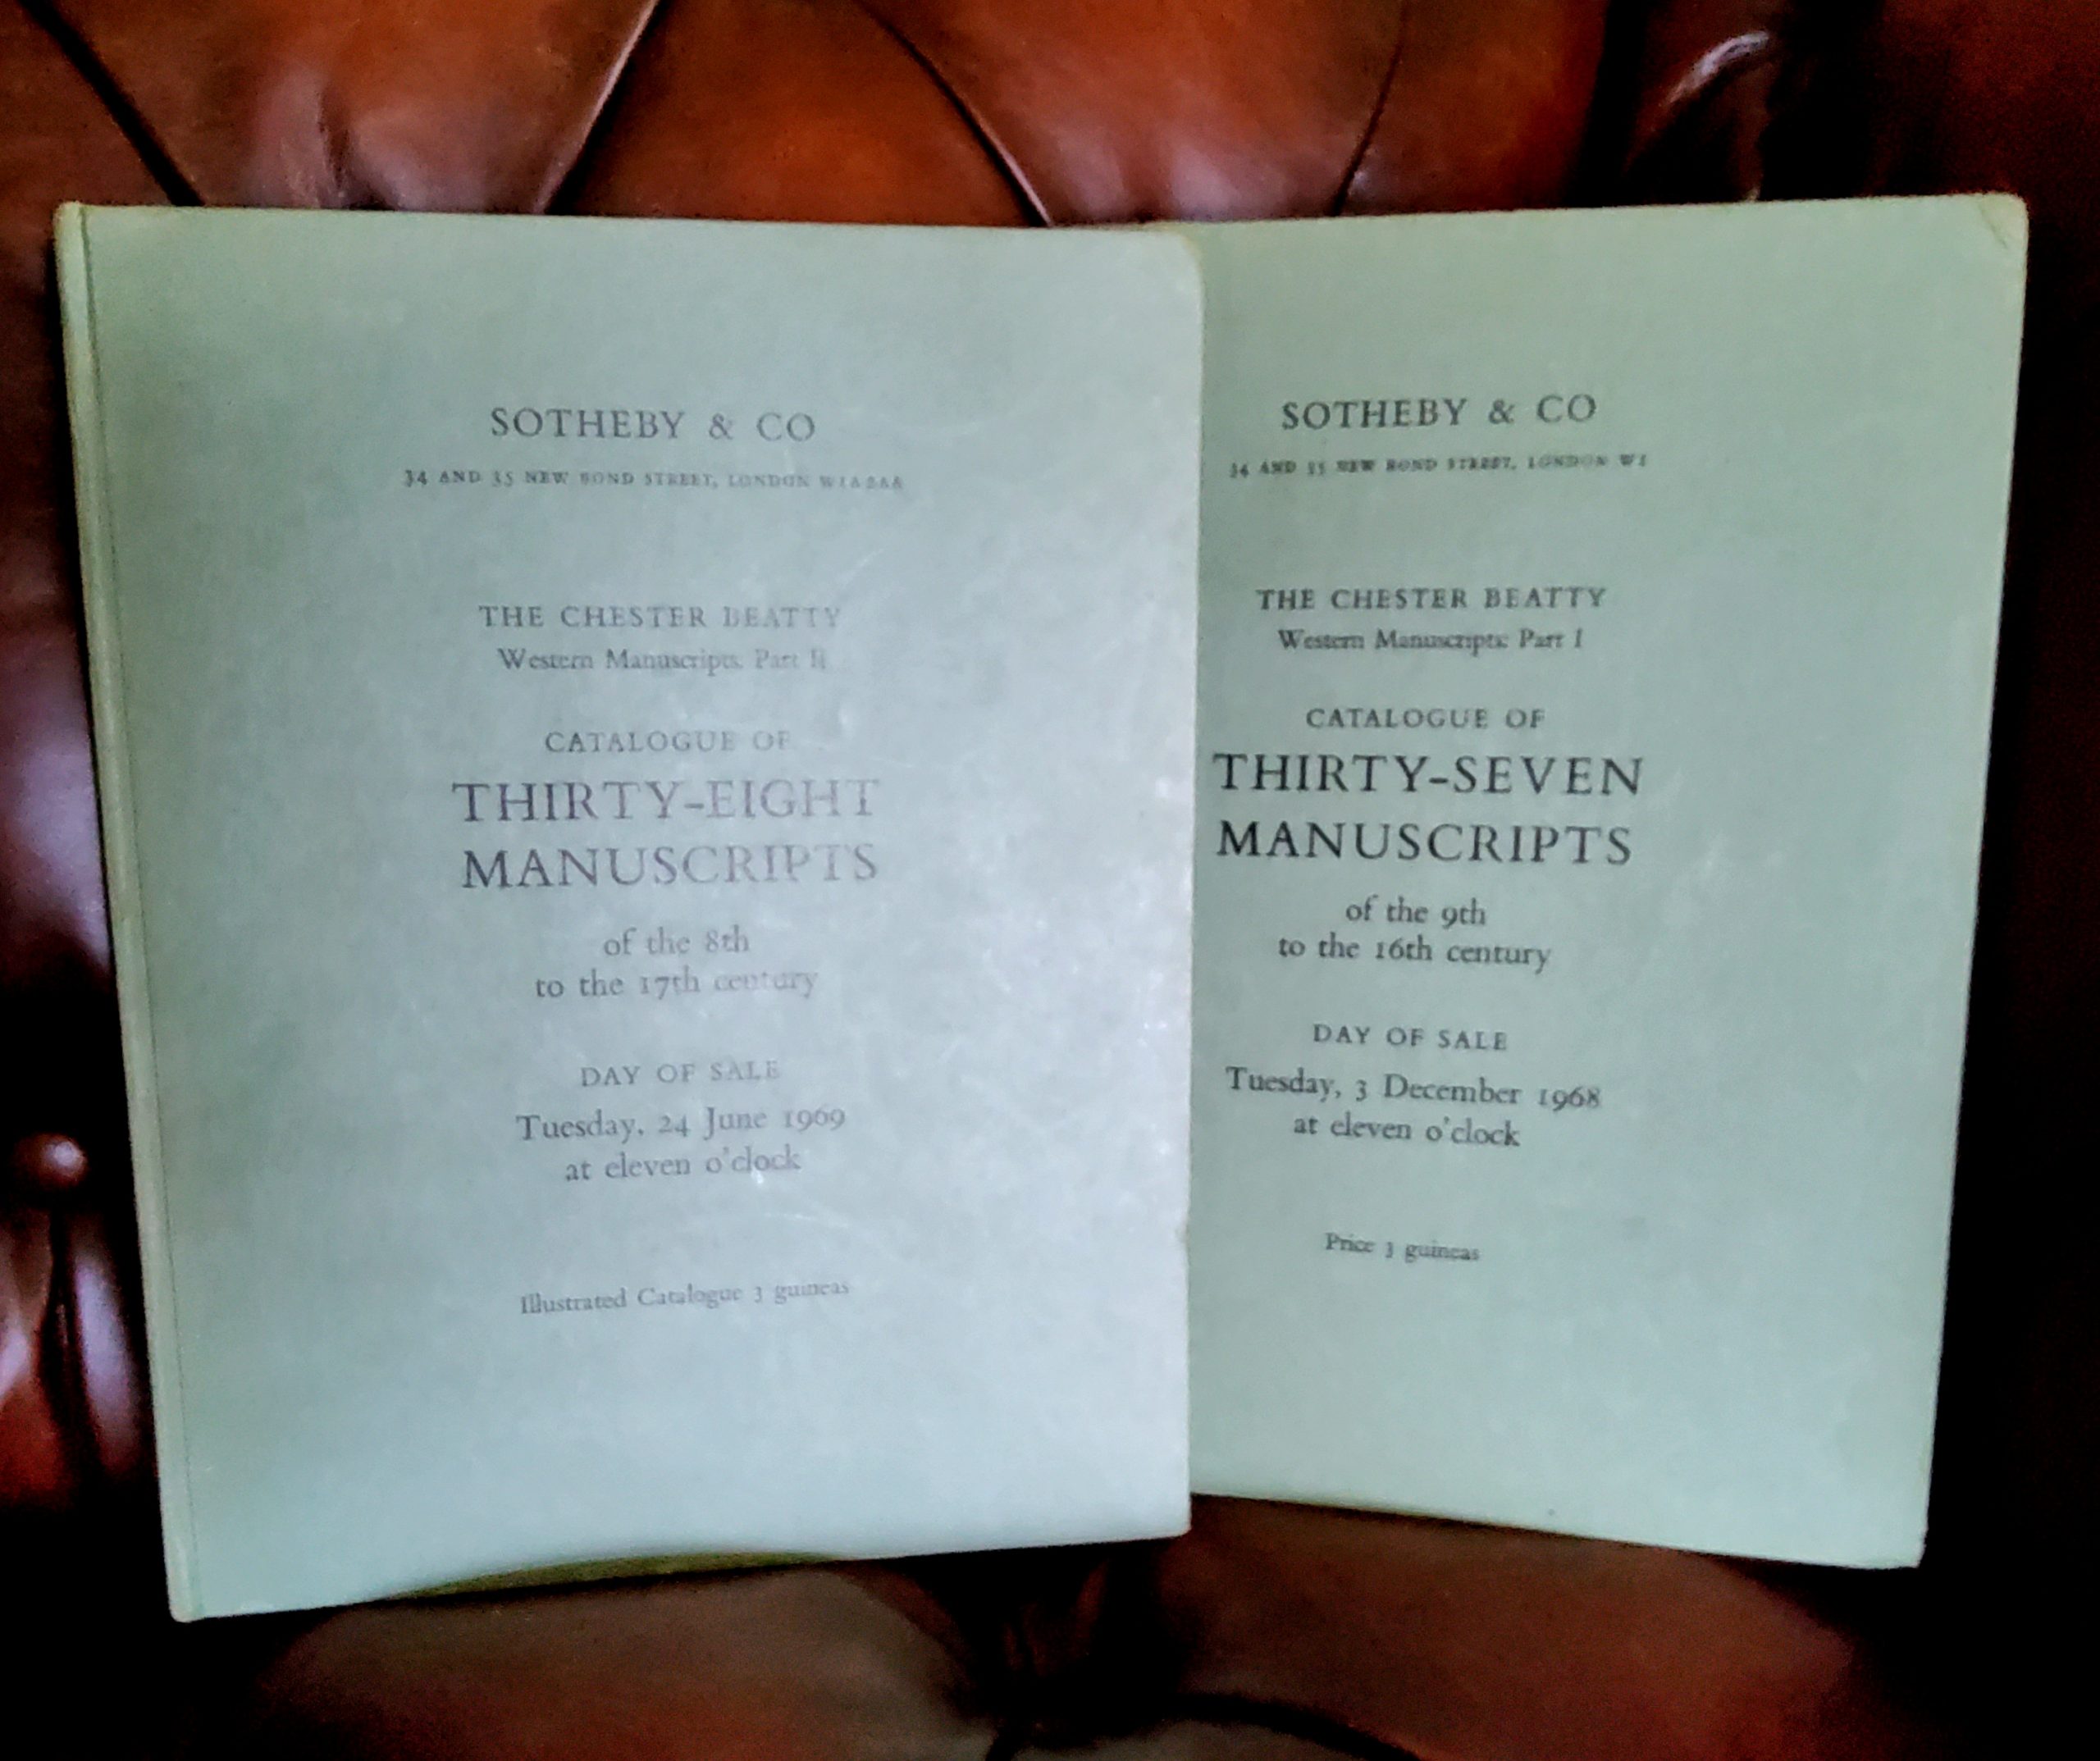 Sotheby’s Catalogues of the Chester Beatty Western Manuscripts Parts I & II